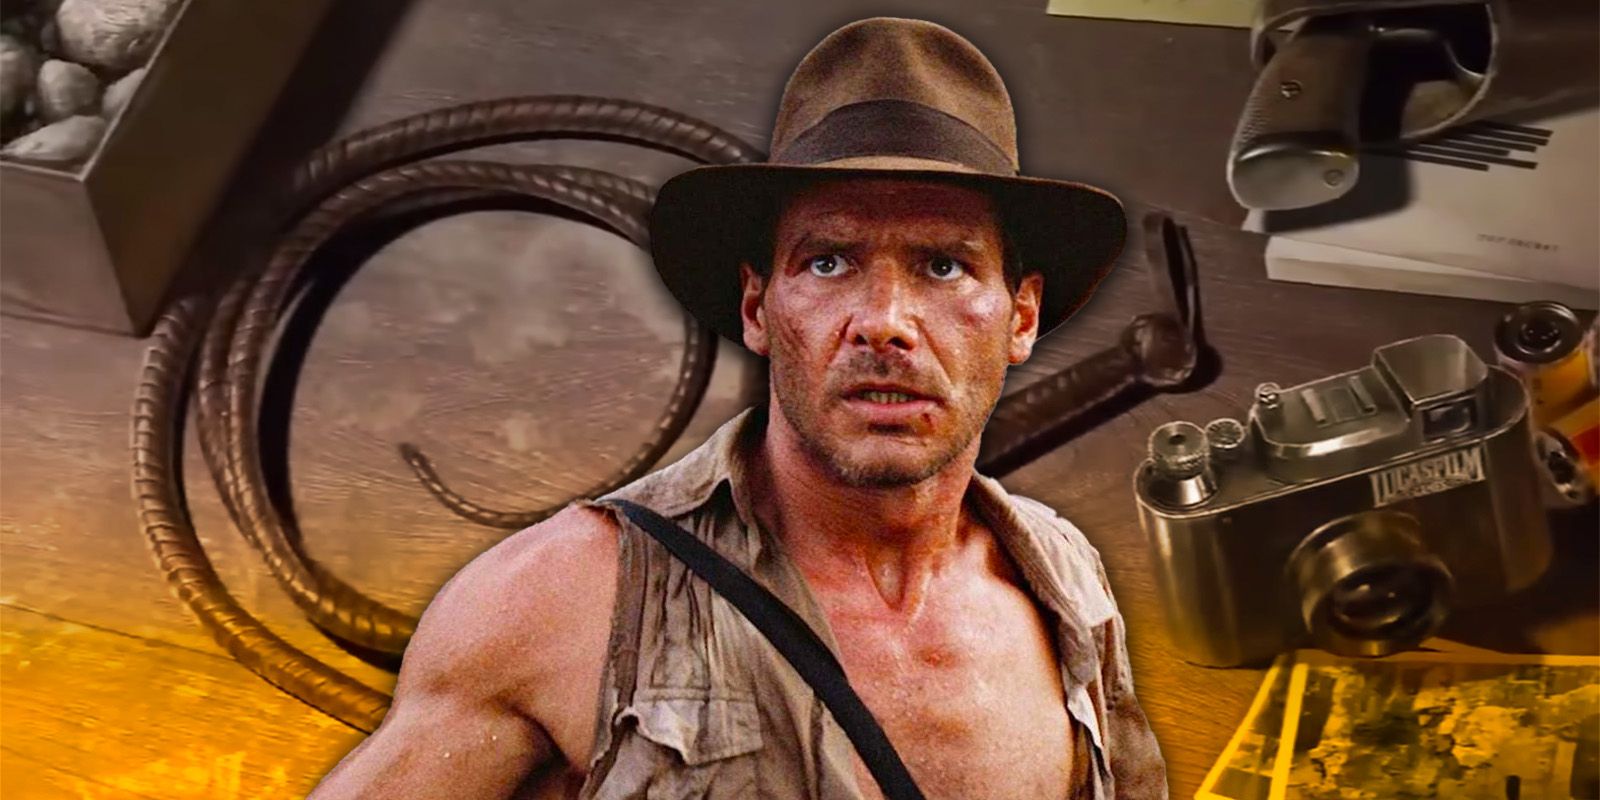 Indiana Jones Game background with Harrison Ford's Indie in the center.